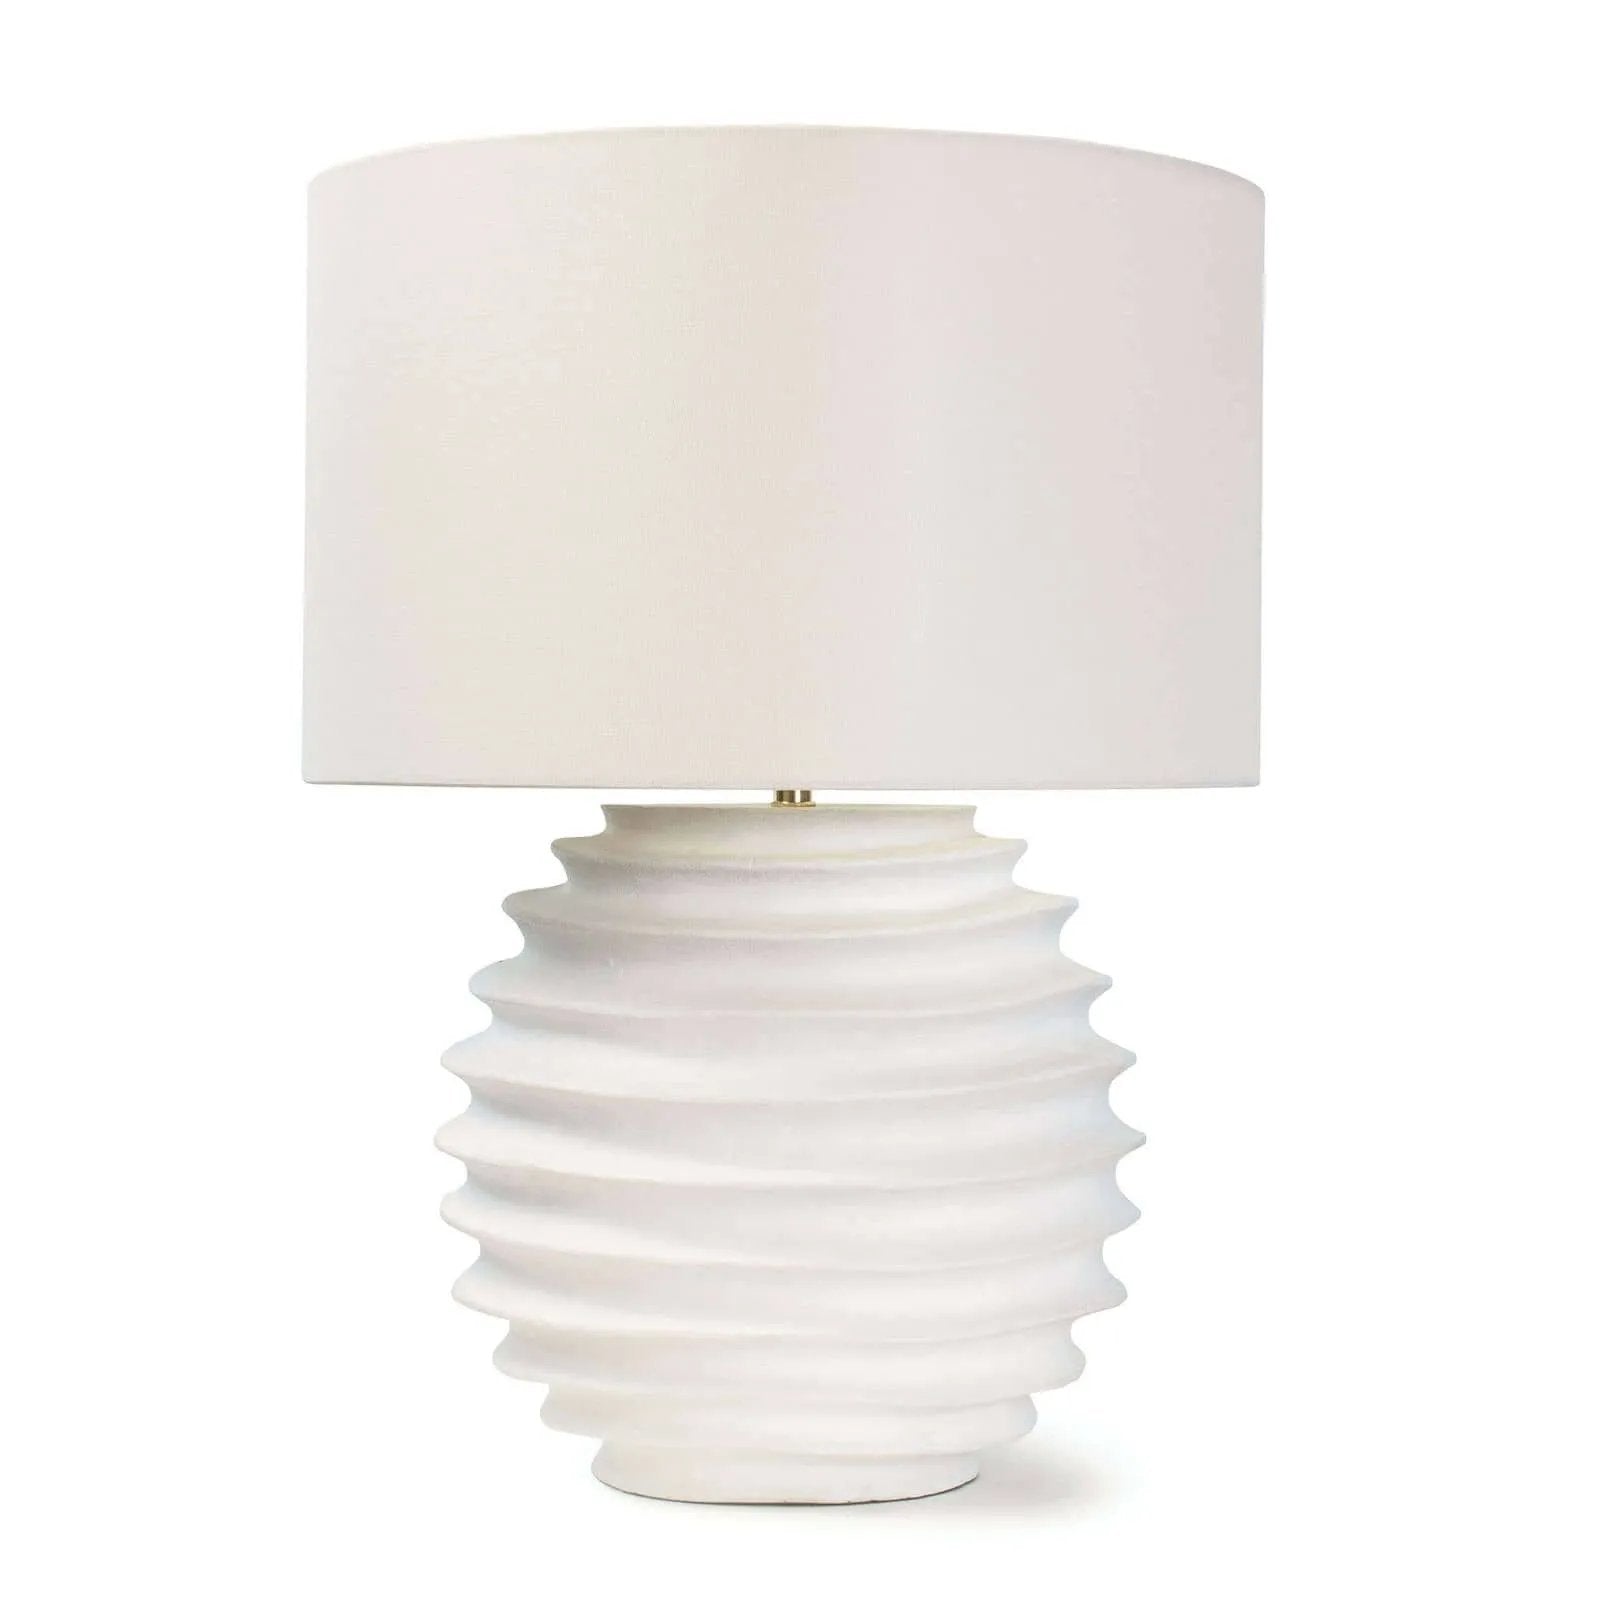 A tactile white finish on the Nabu table lamp accentuates its accordion-like base. Its simple air yet artisan feel would make for a beautiful welcome in an entryway. Amethyst Home provides interior design, new home construction design consulting, vintage area rugs, and lighting in the Calabasas metro area.